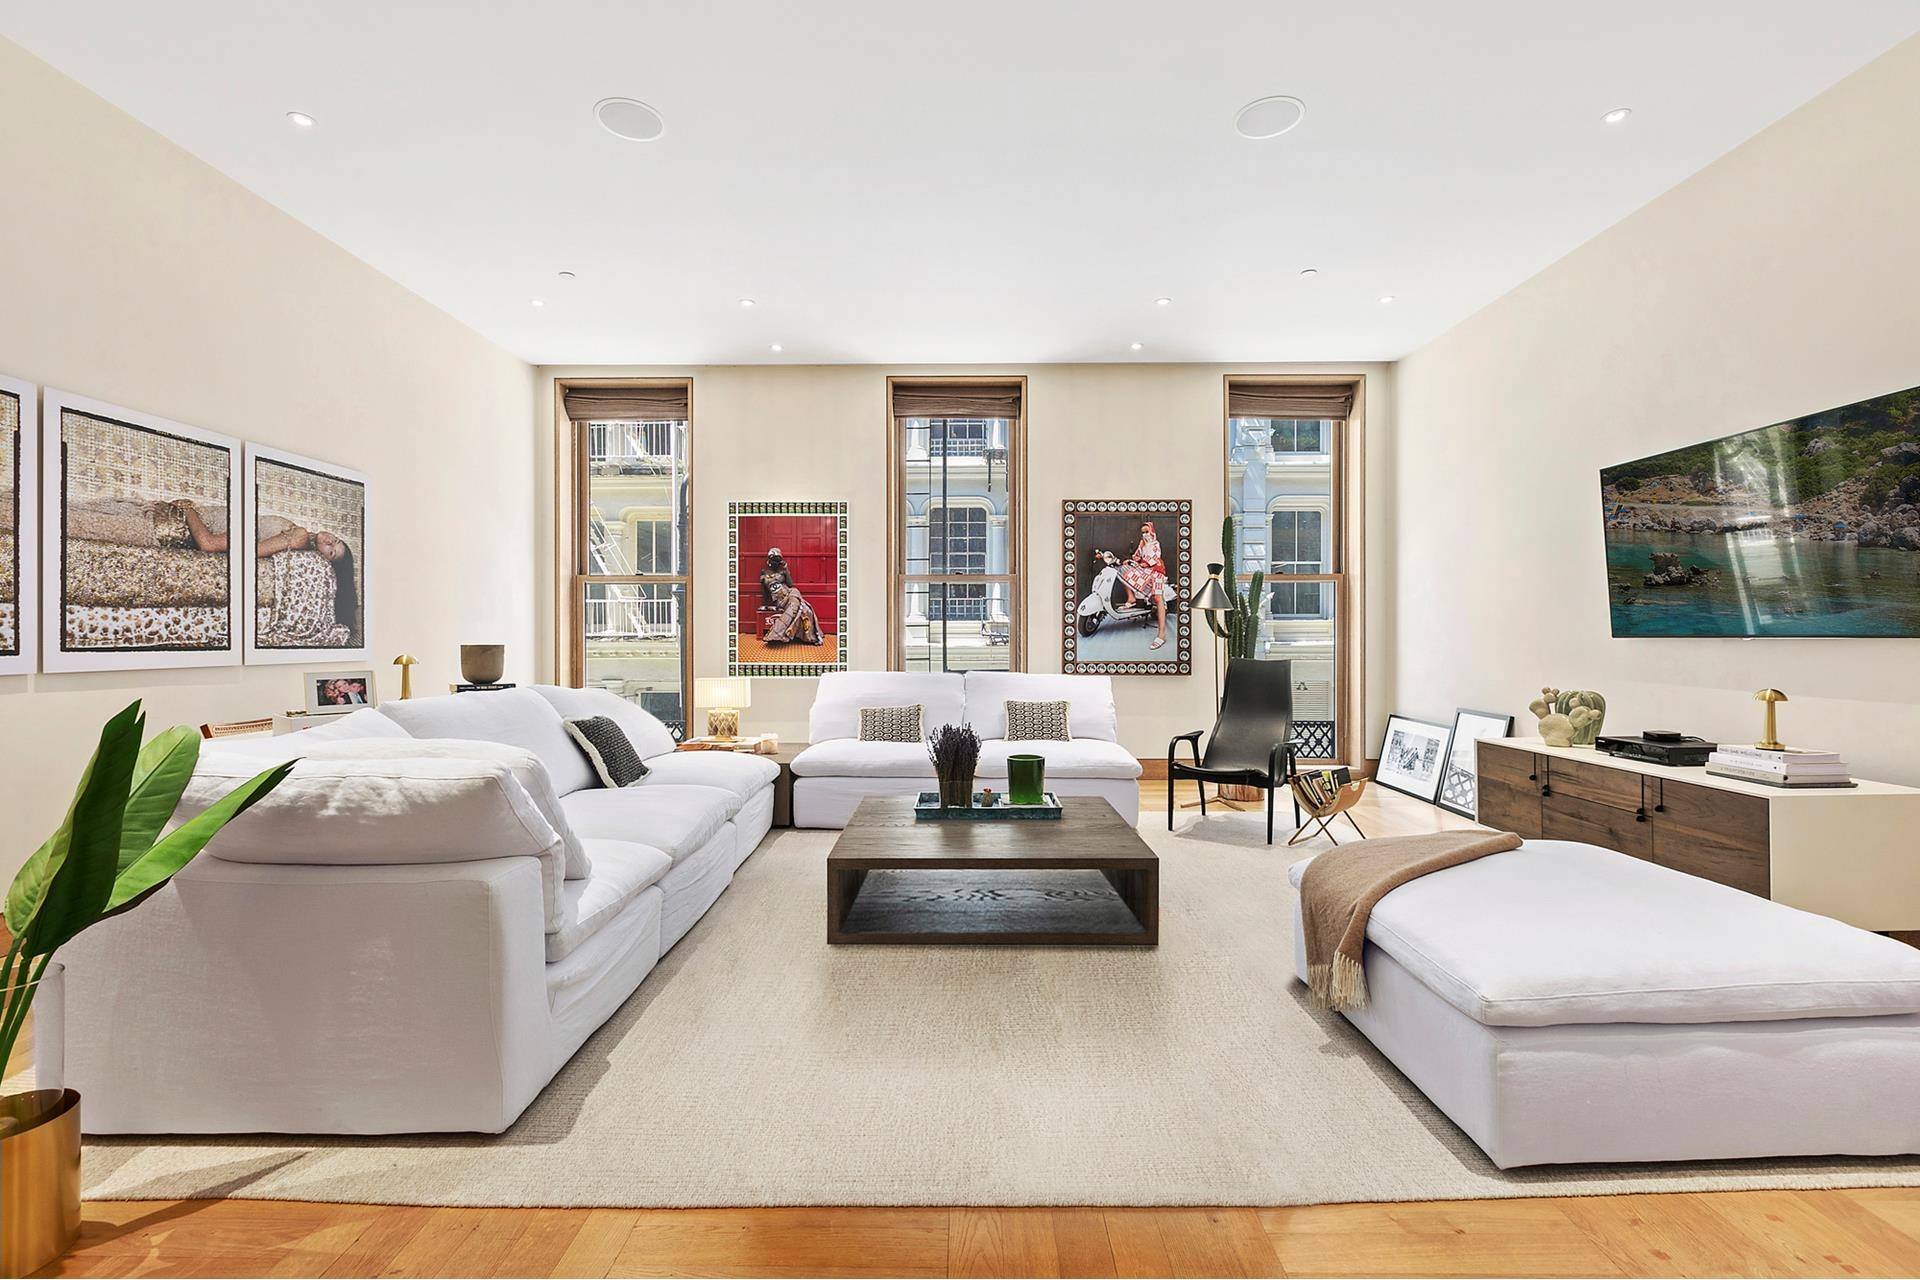 70 Greene Street, Residence 2Offered unfurnished for 15, 500 M or furnished for 17, 500 MLocated in the heart of Soho's Historic Cast Iron District, this modern and sleek loft ...